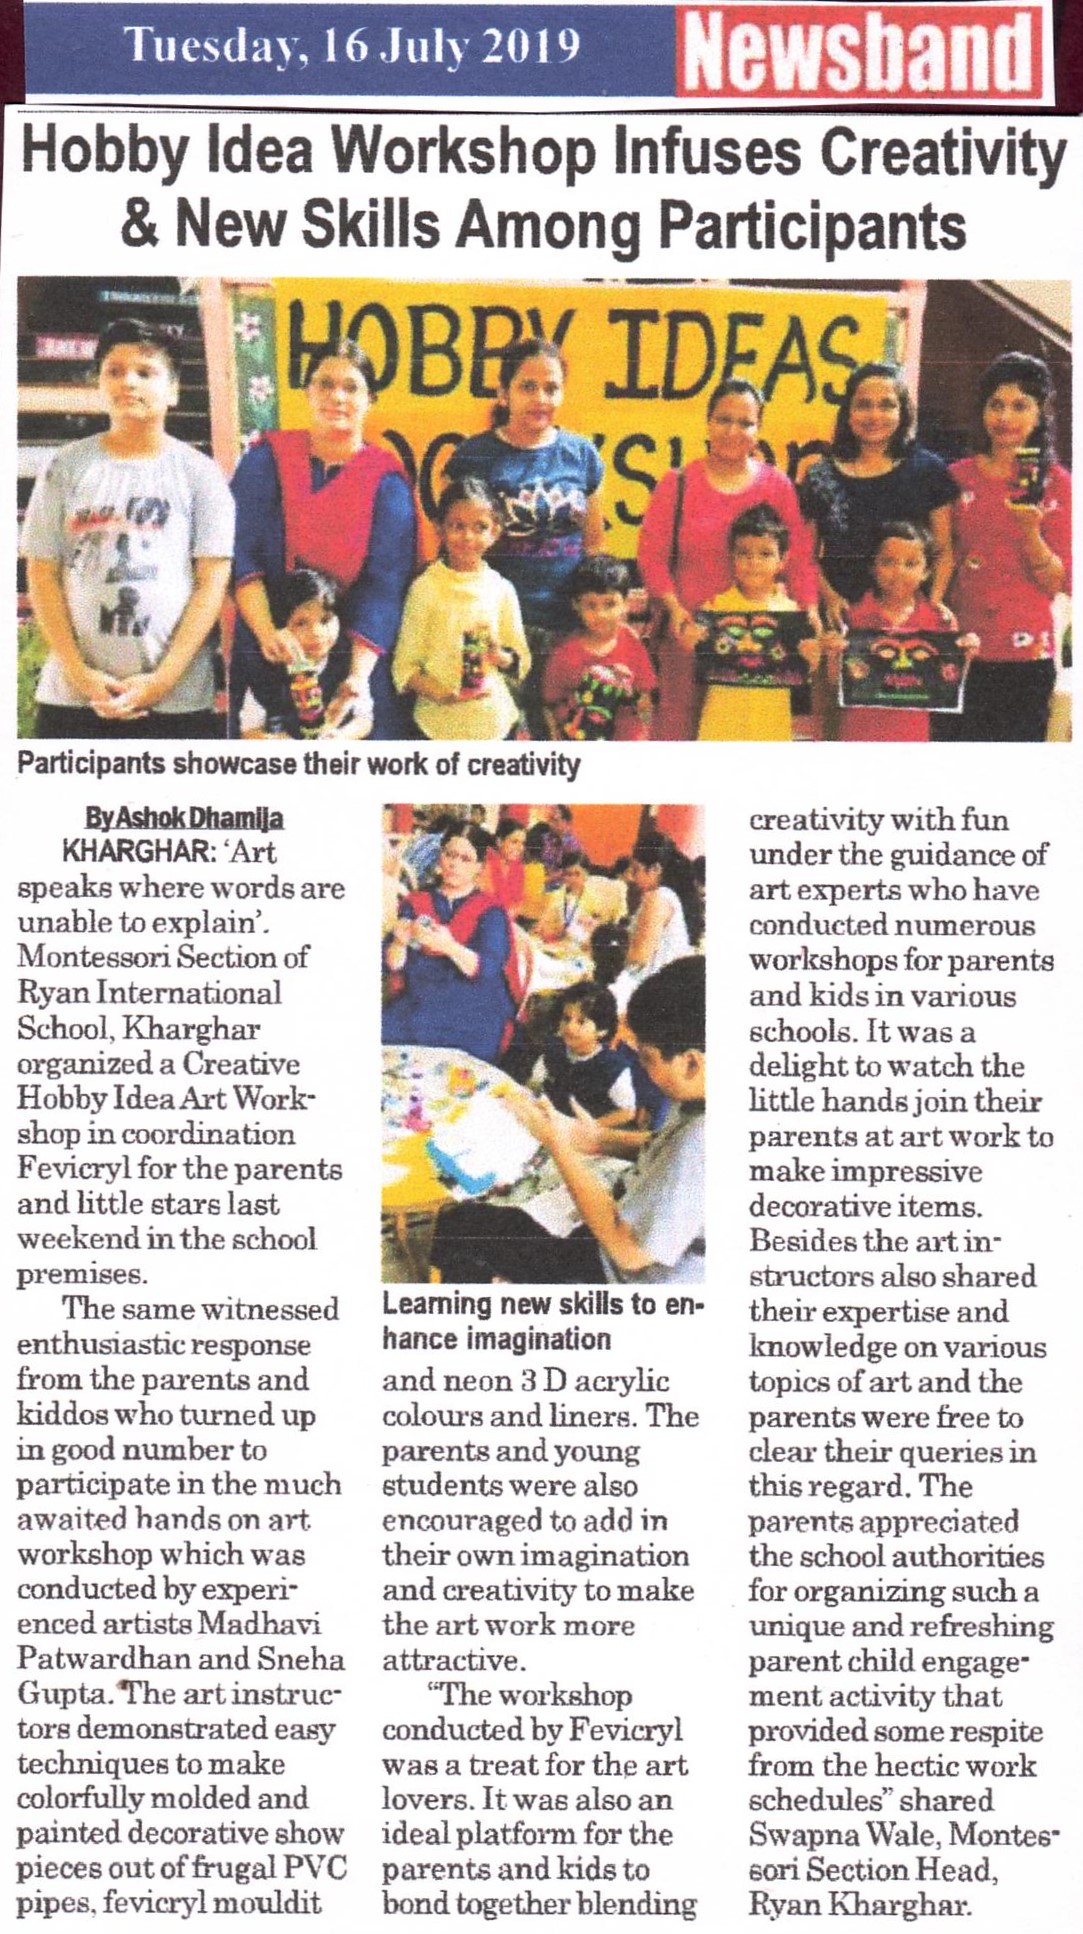 Hobby Idea Workshop Infuses Creativity &  new skills among participants was mentioned in News band - Ryan International School, Kharghar